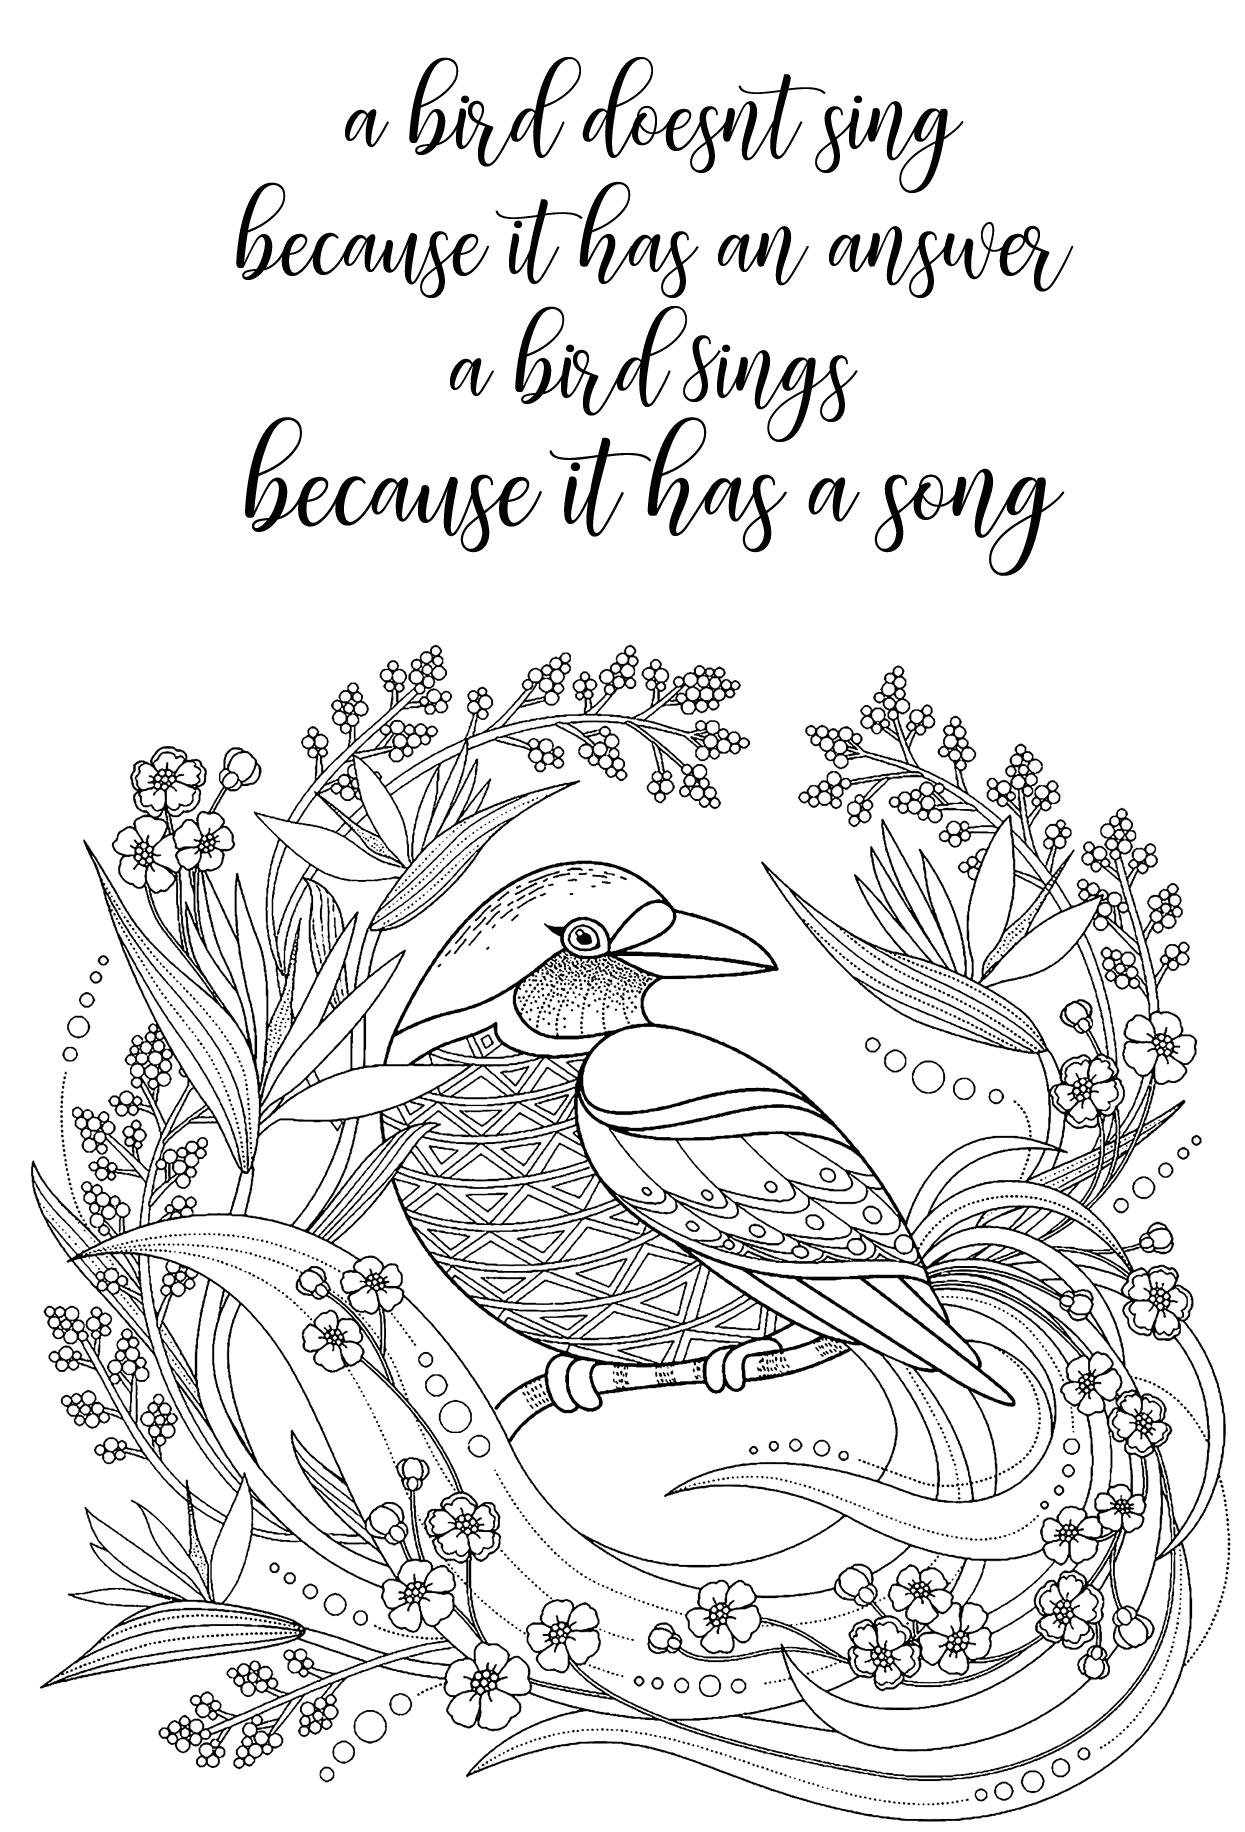 Bird Song Quote Coloring Page